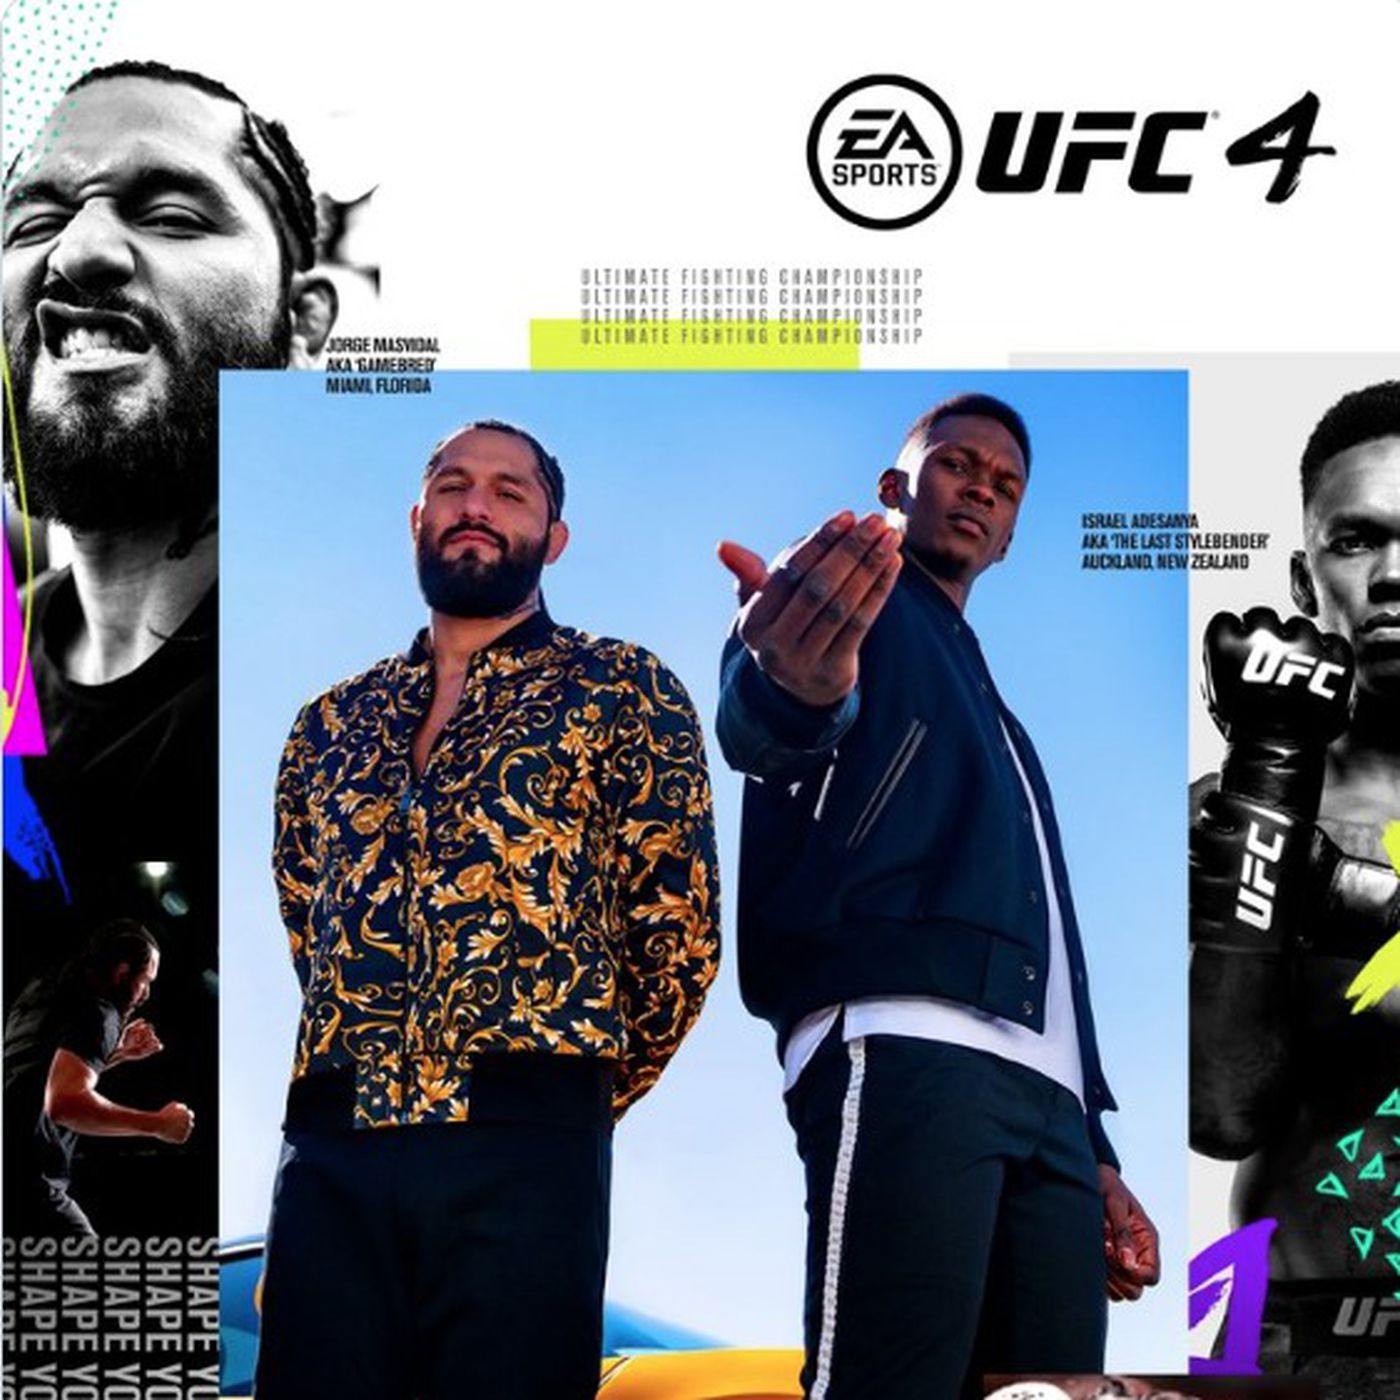 ufc-4-ps4-one